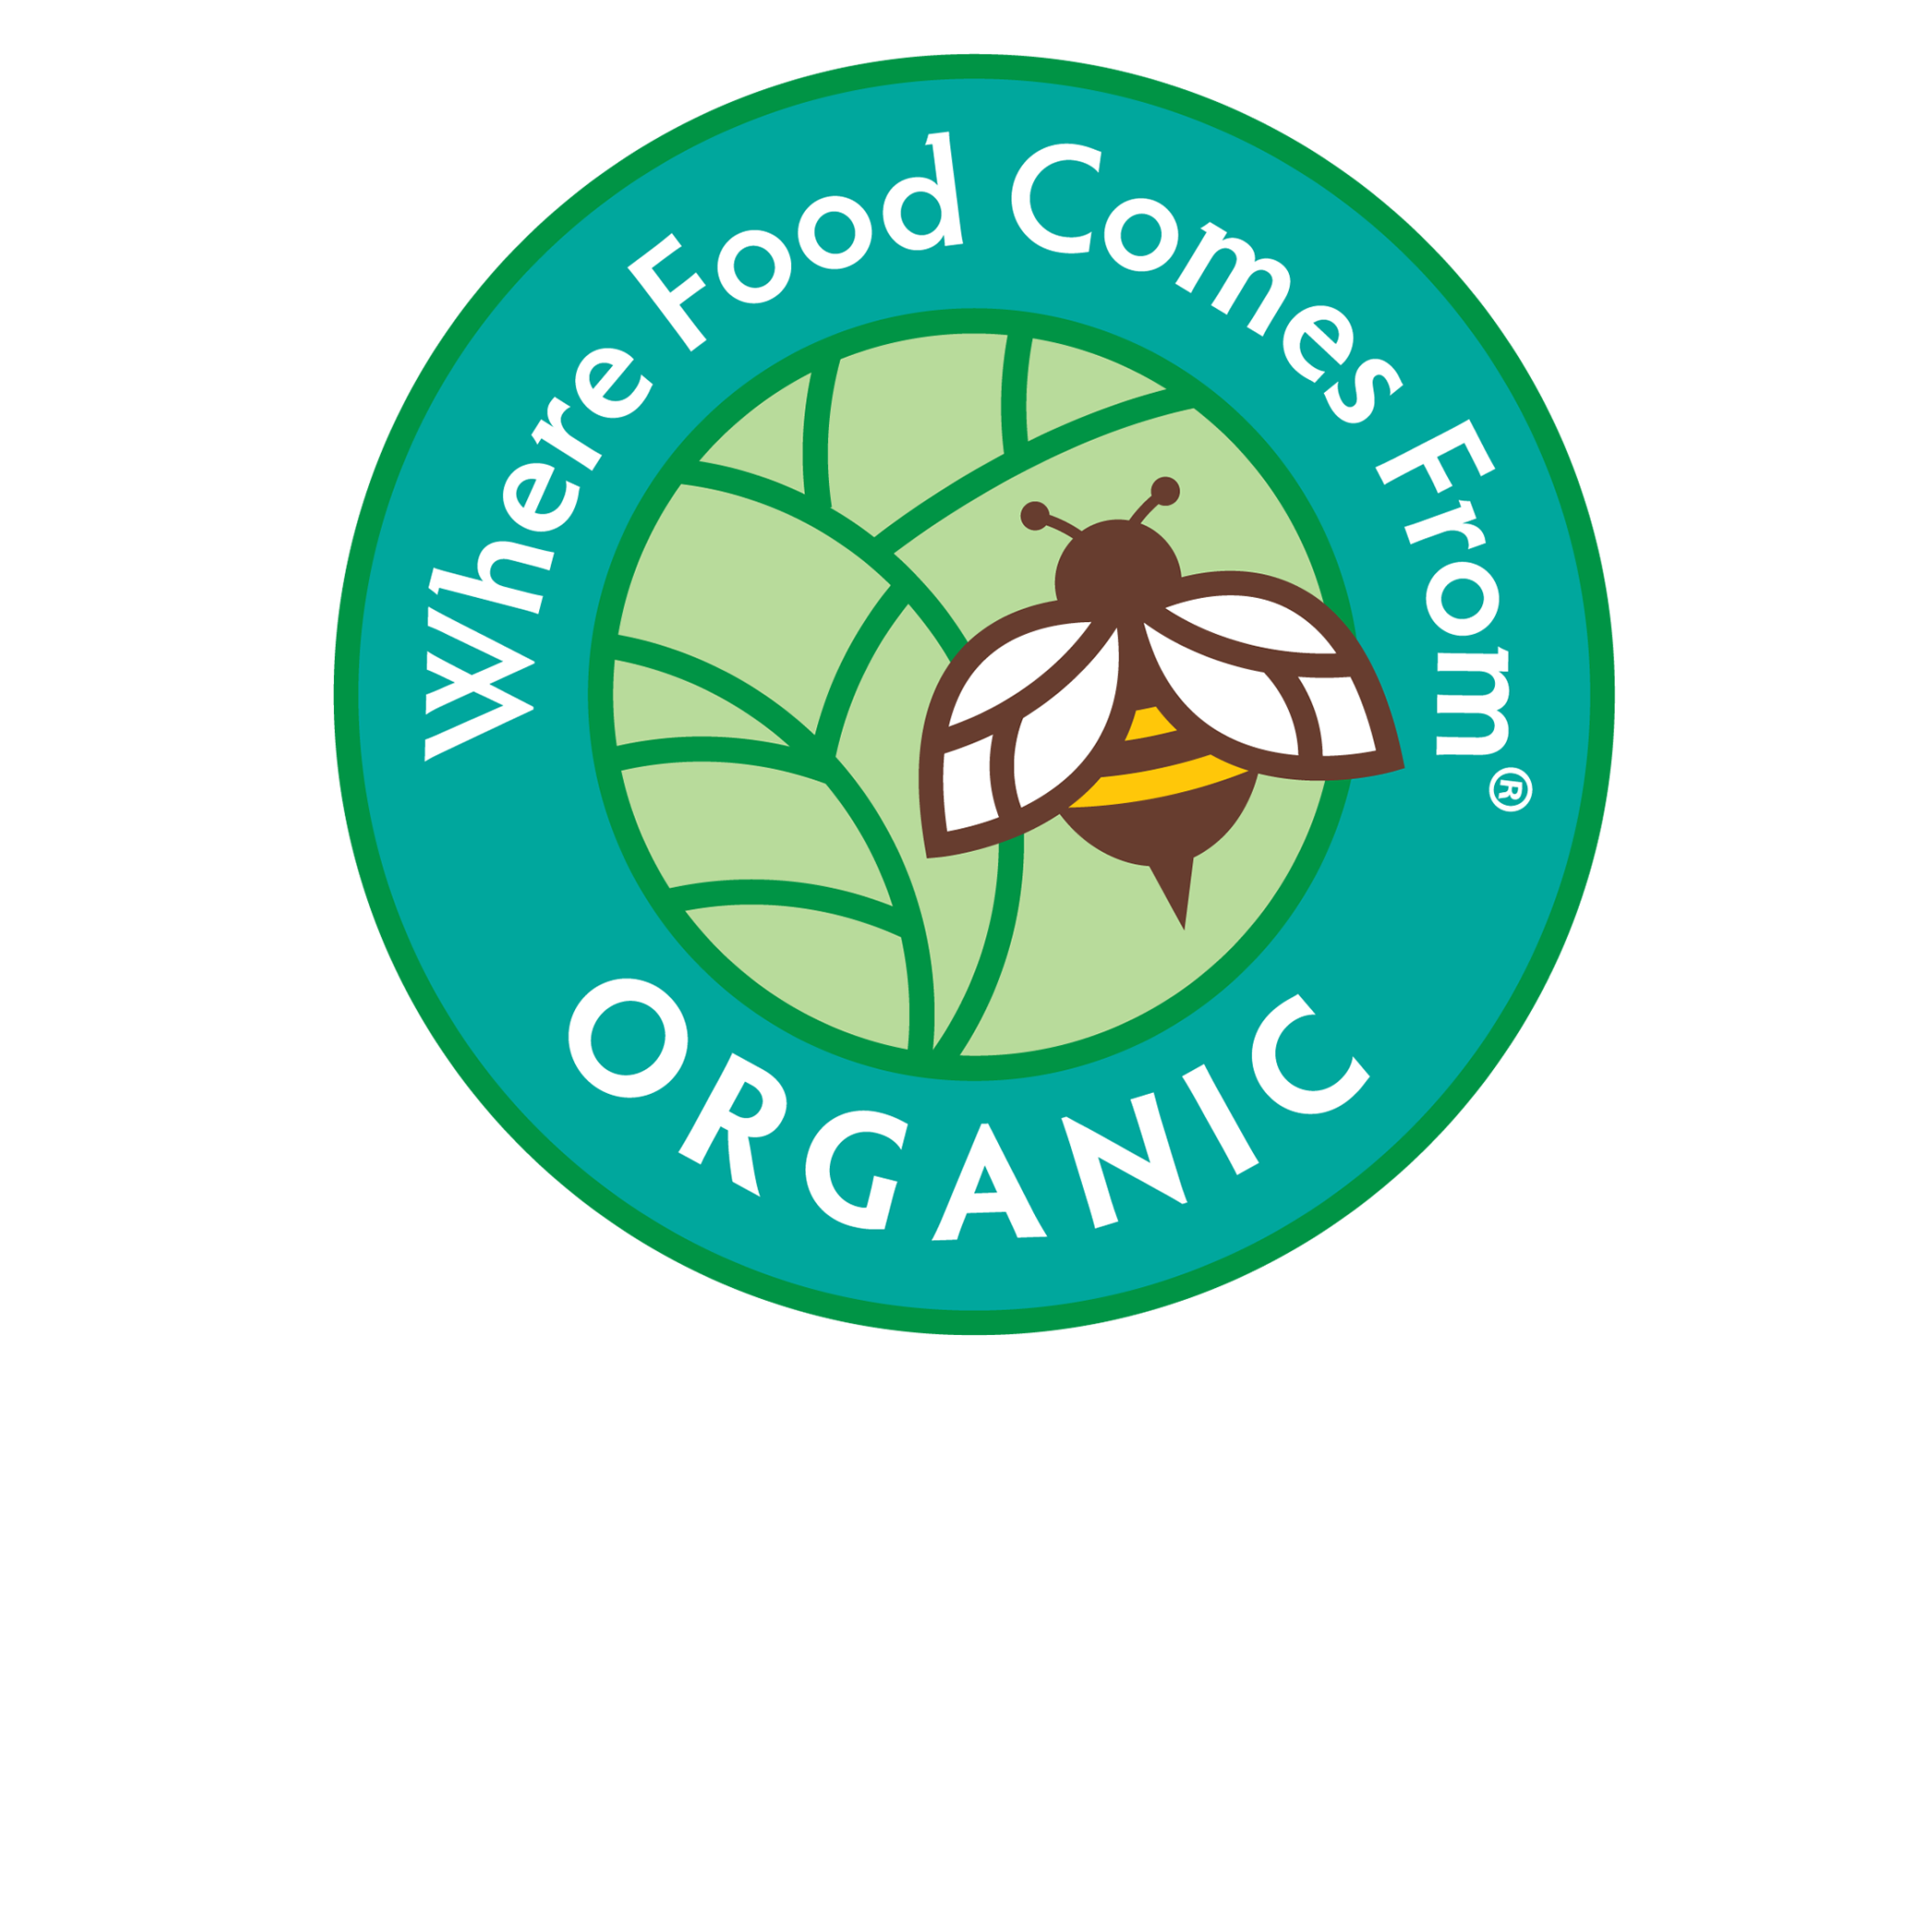 Where Food Comes From Organic seal